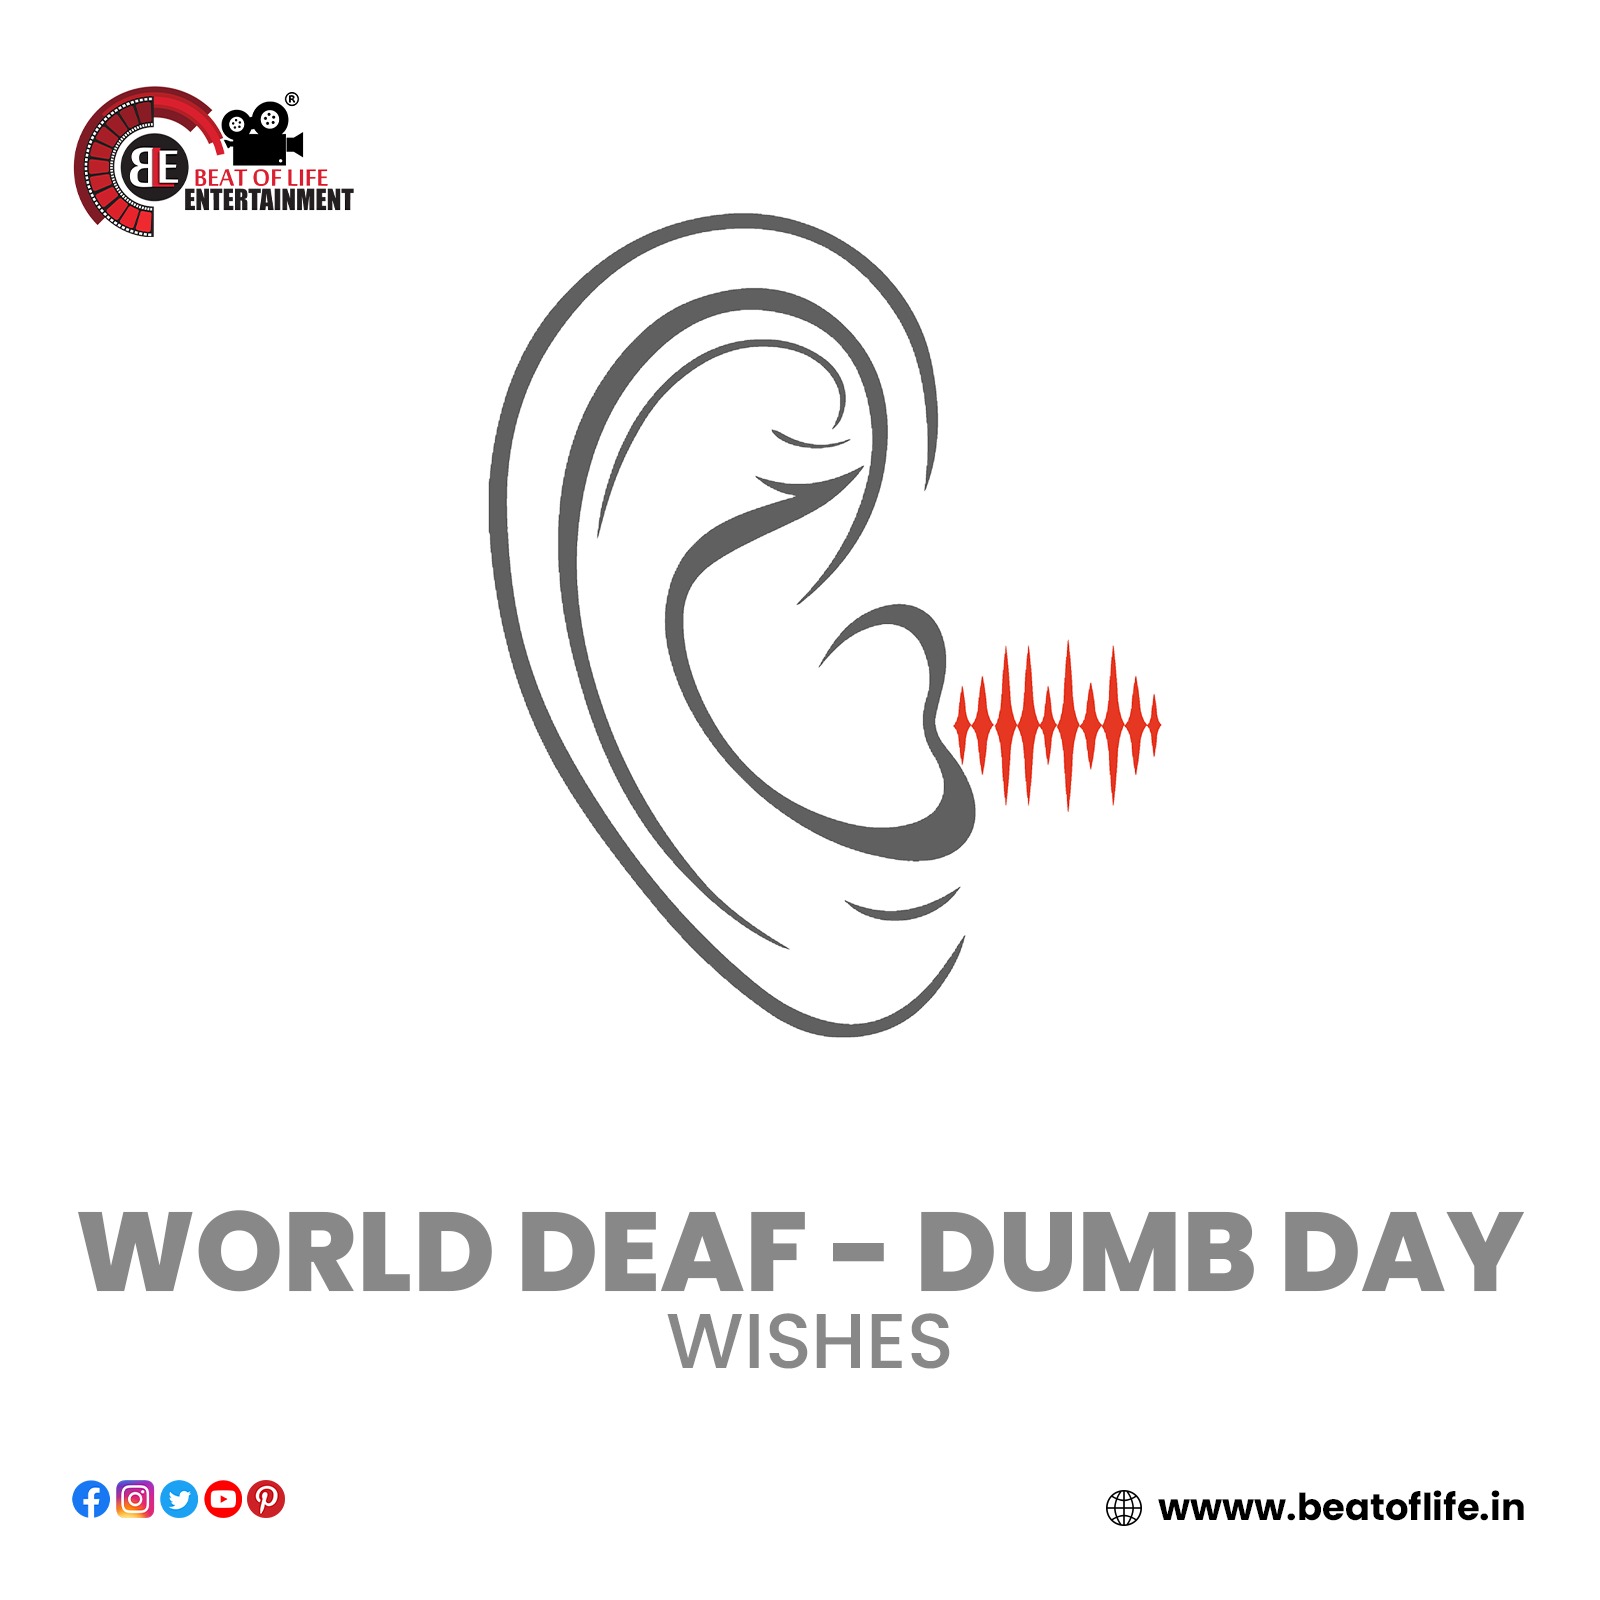 World Deaf and Dumb Day wishes